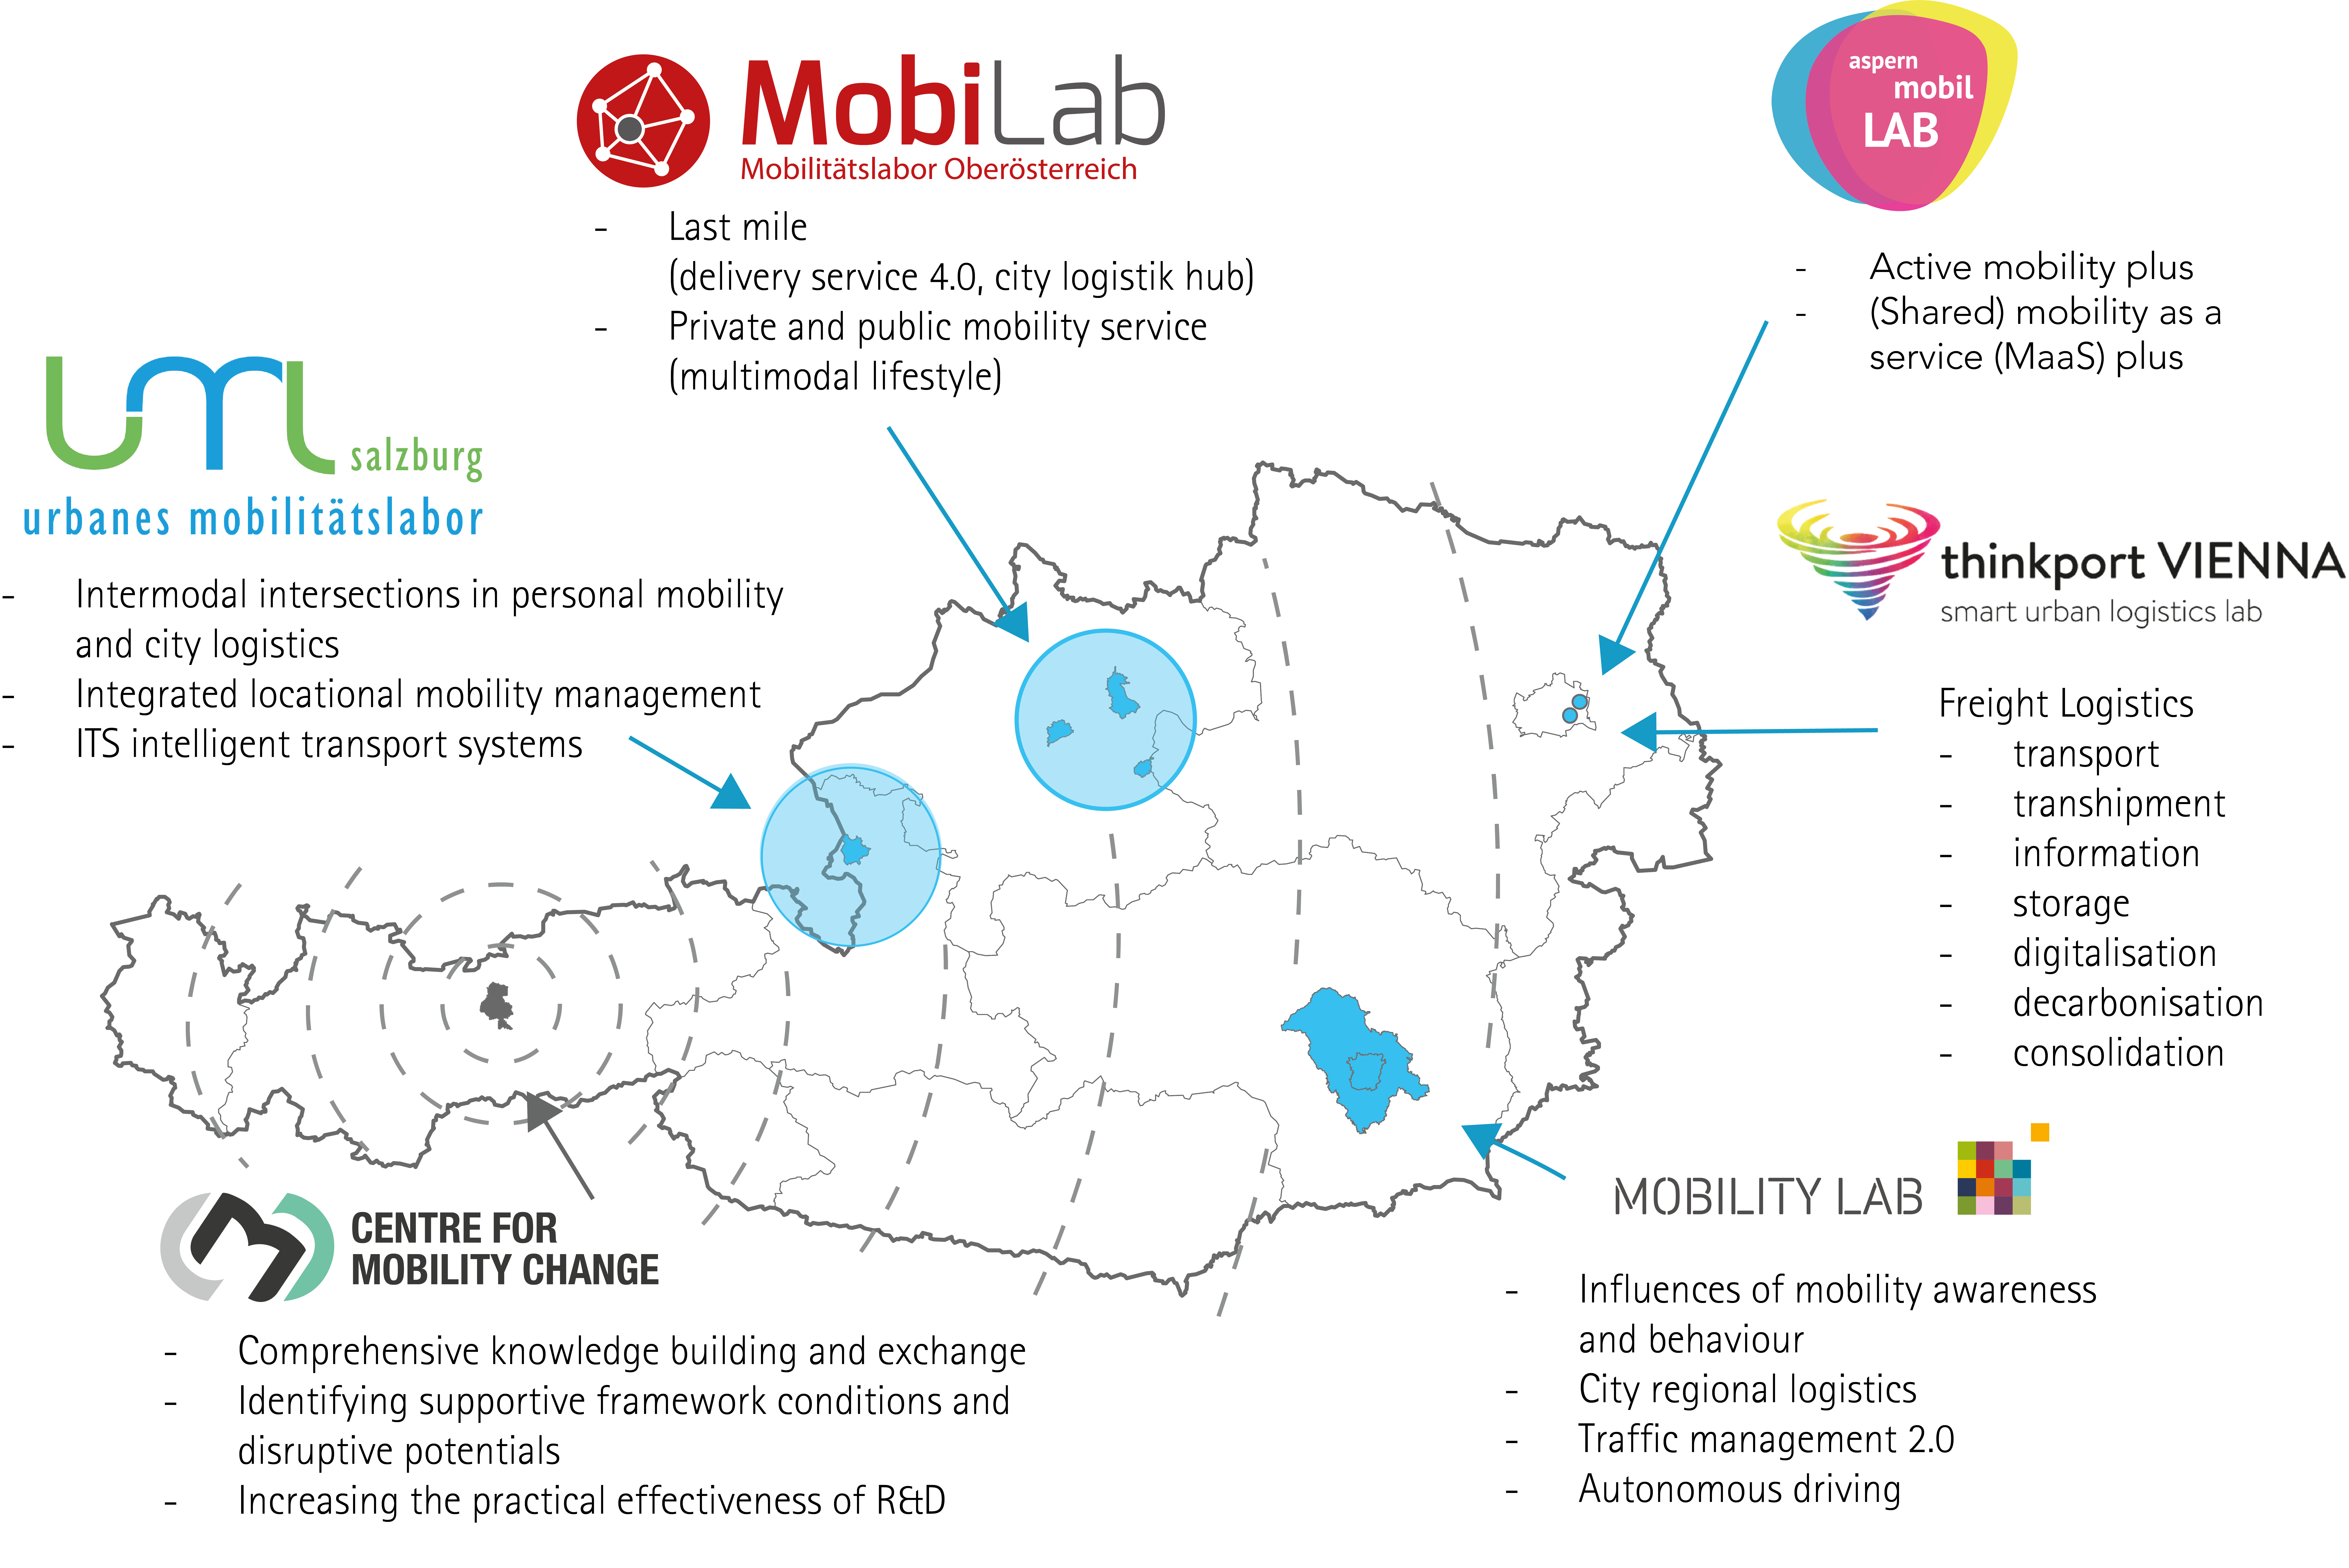 Overview map of the five Mobility Labs in Austria. Those are aspern mobil Lab and thinkport Vienna, Mobility Lab in Graz, MobiLab in Upper Austria, and UML Salzburg